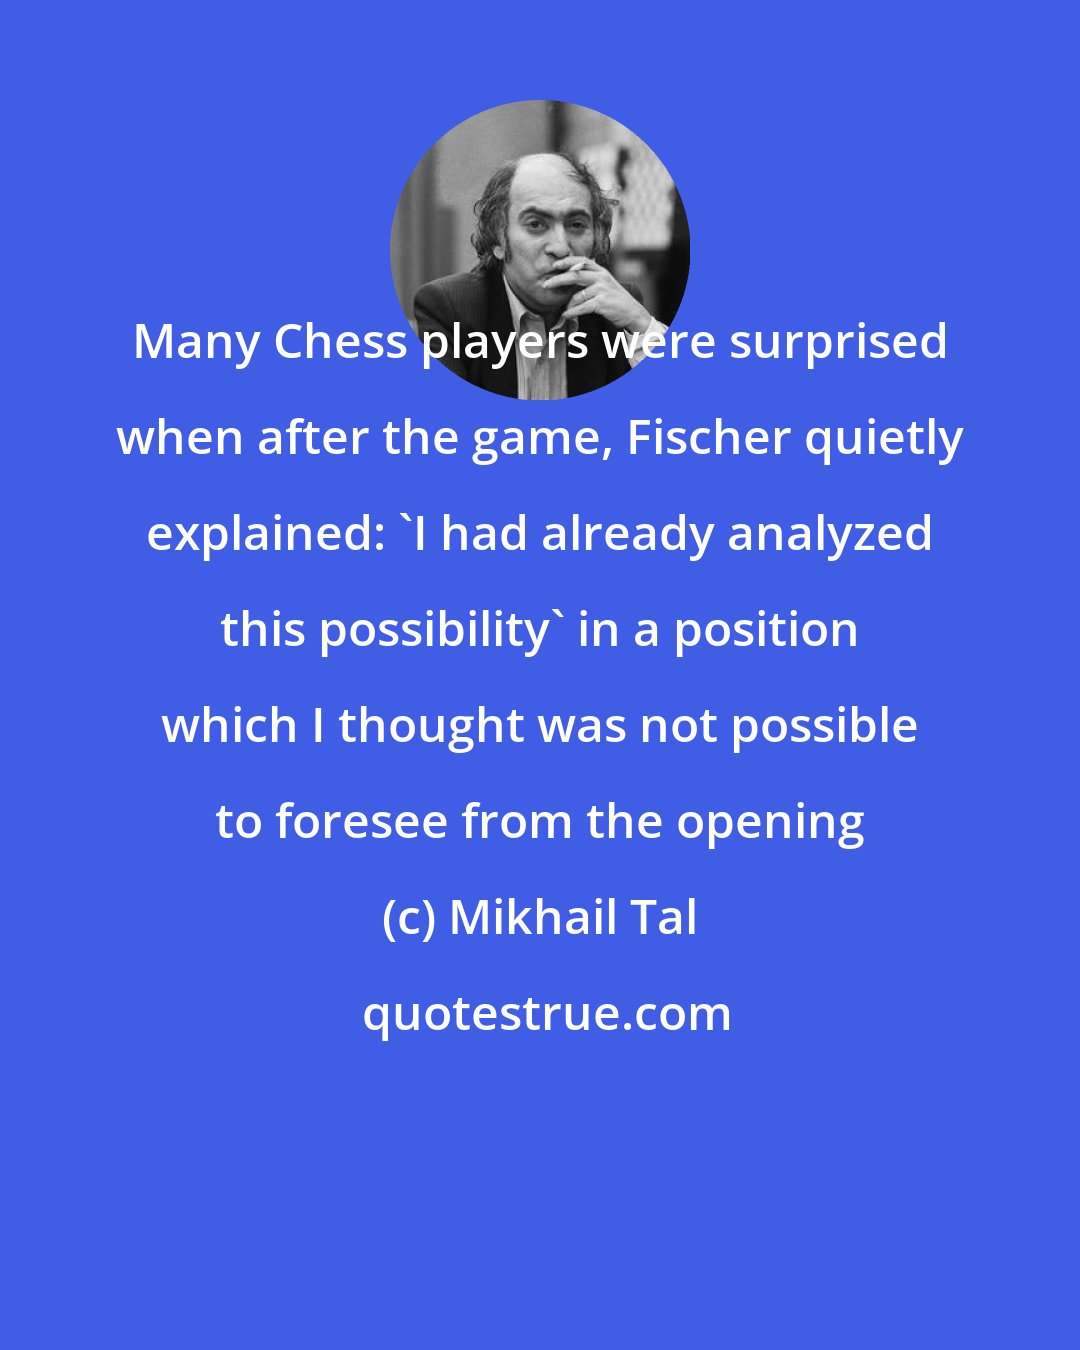 Mikhail Tal: Many Chess players were surprised when after the game, Fischer quietly explained: 'I had already analyzed this possibility' in a position which I thought was not possible to foresee from the opening